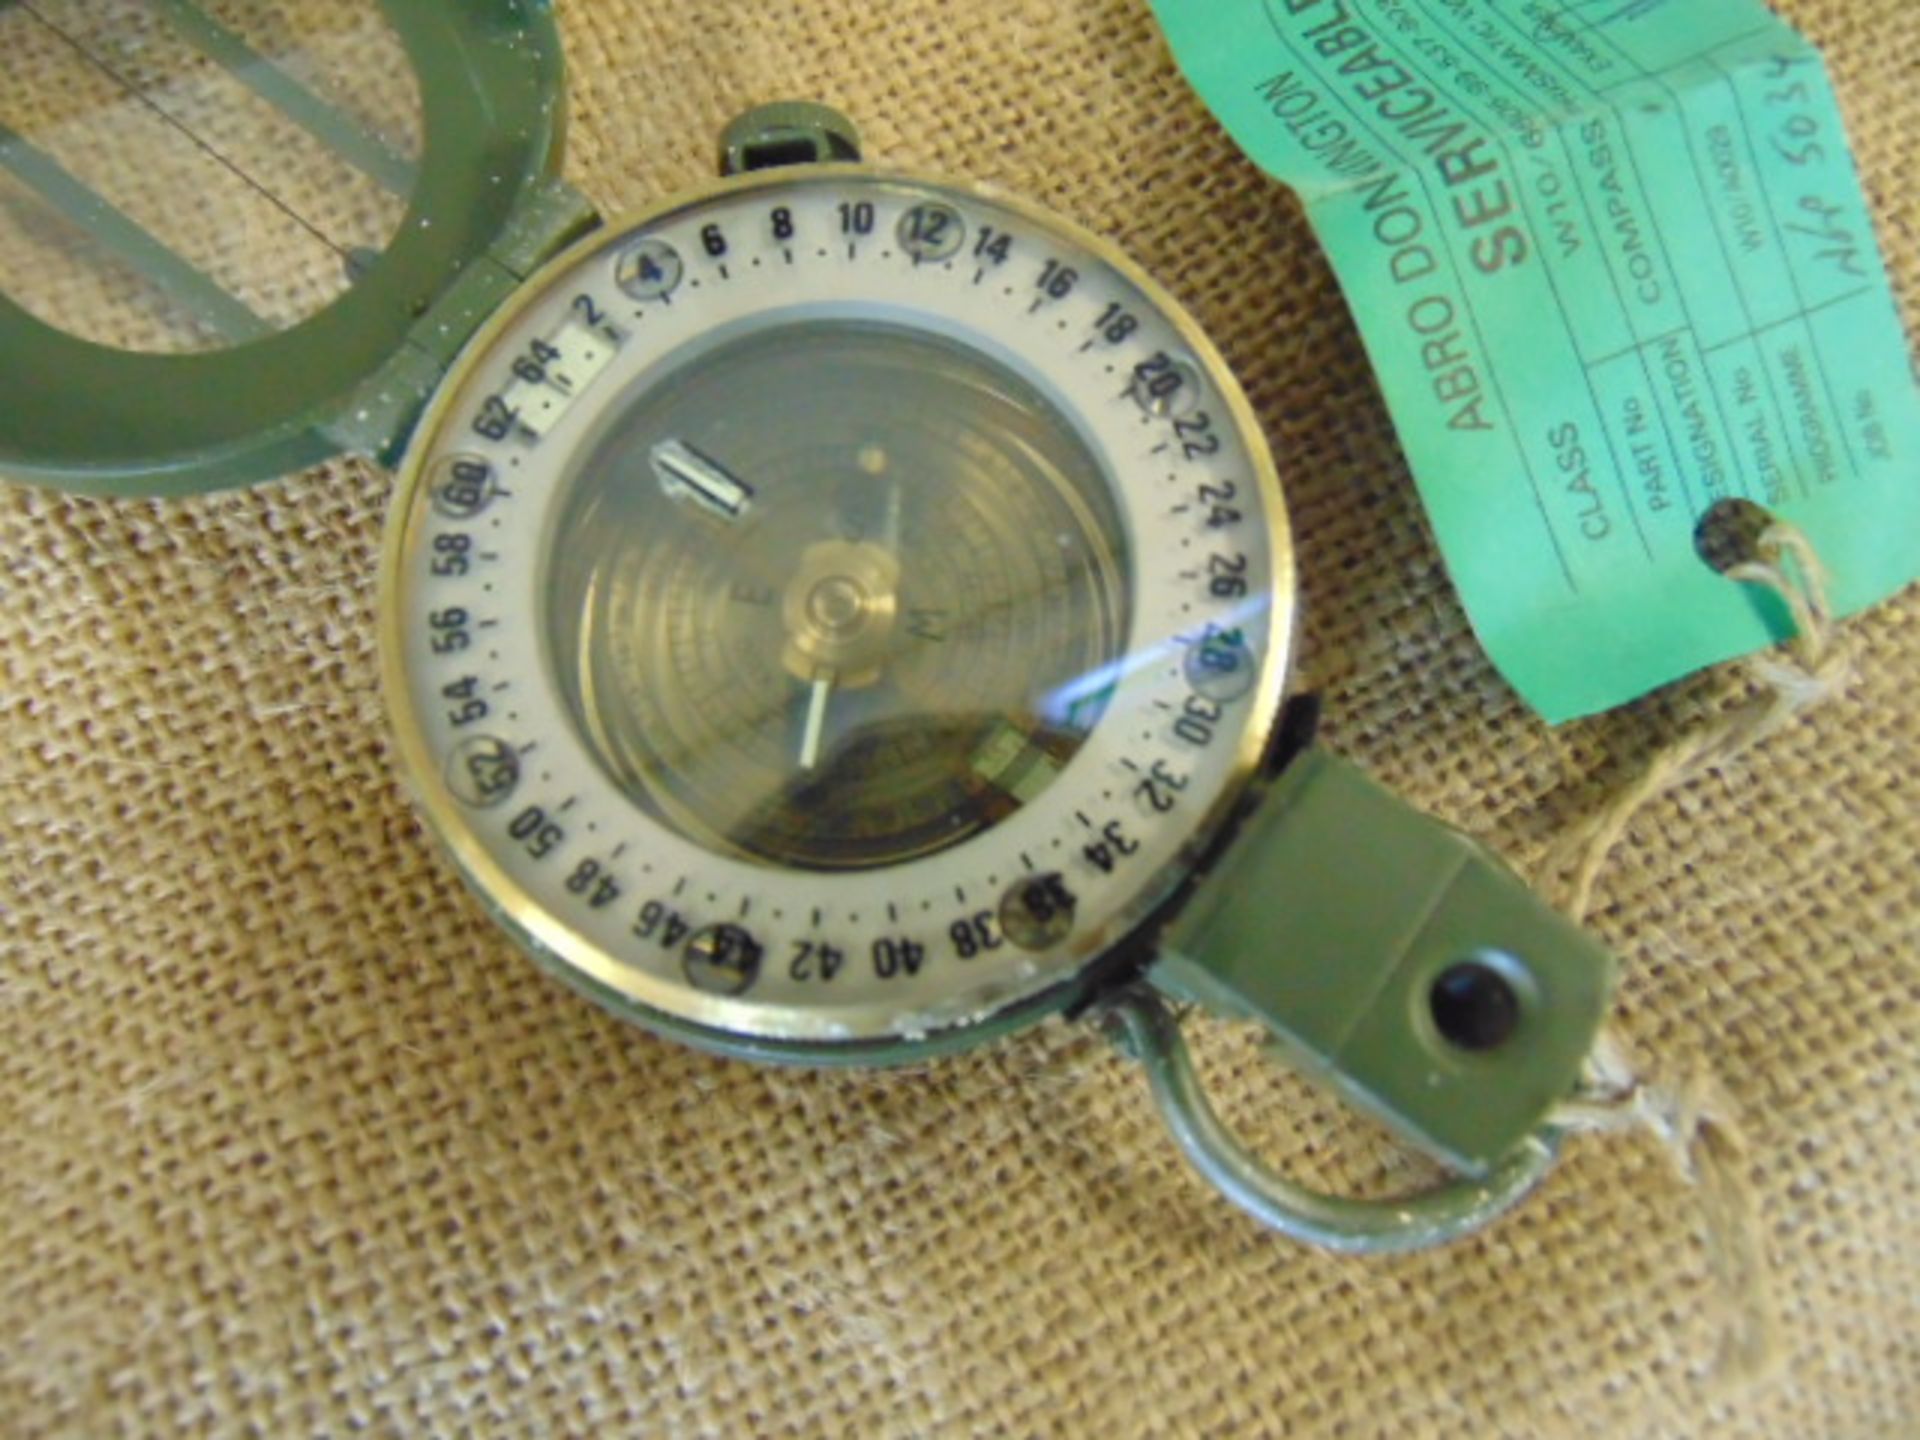 Genuine British Army Stanley Prismatic Marching Compass - Image 2 of 5